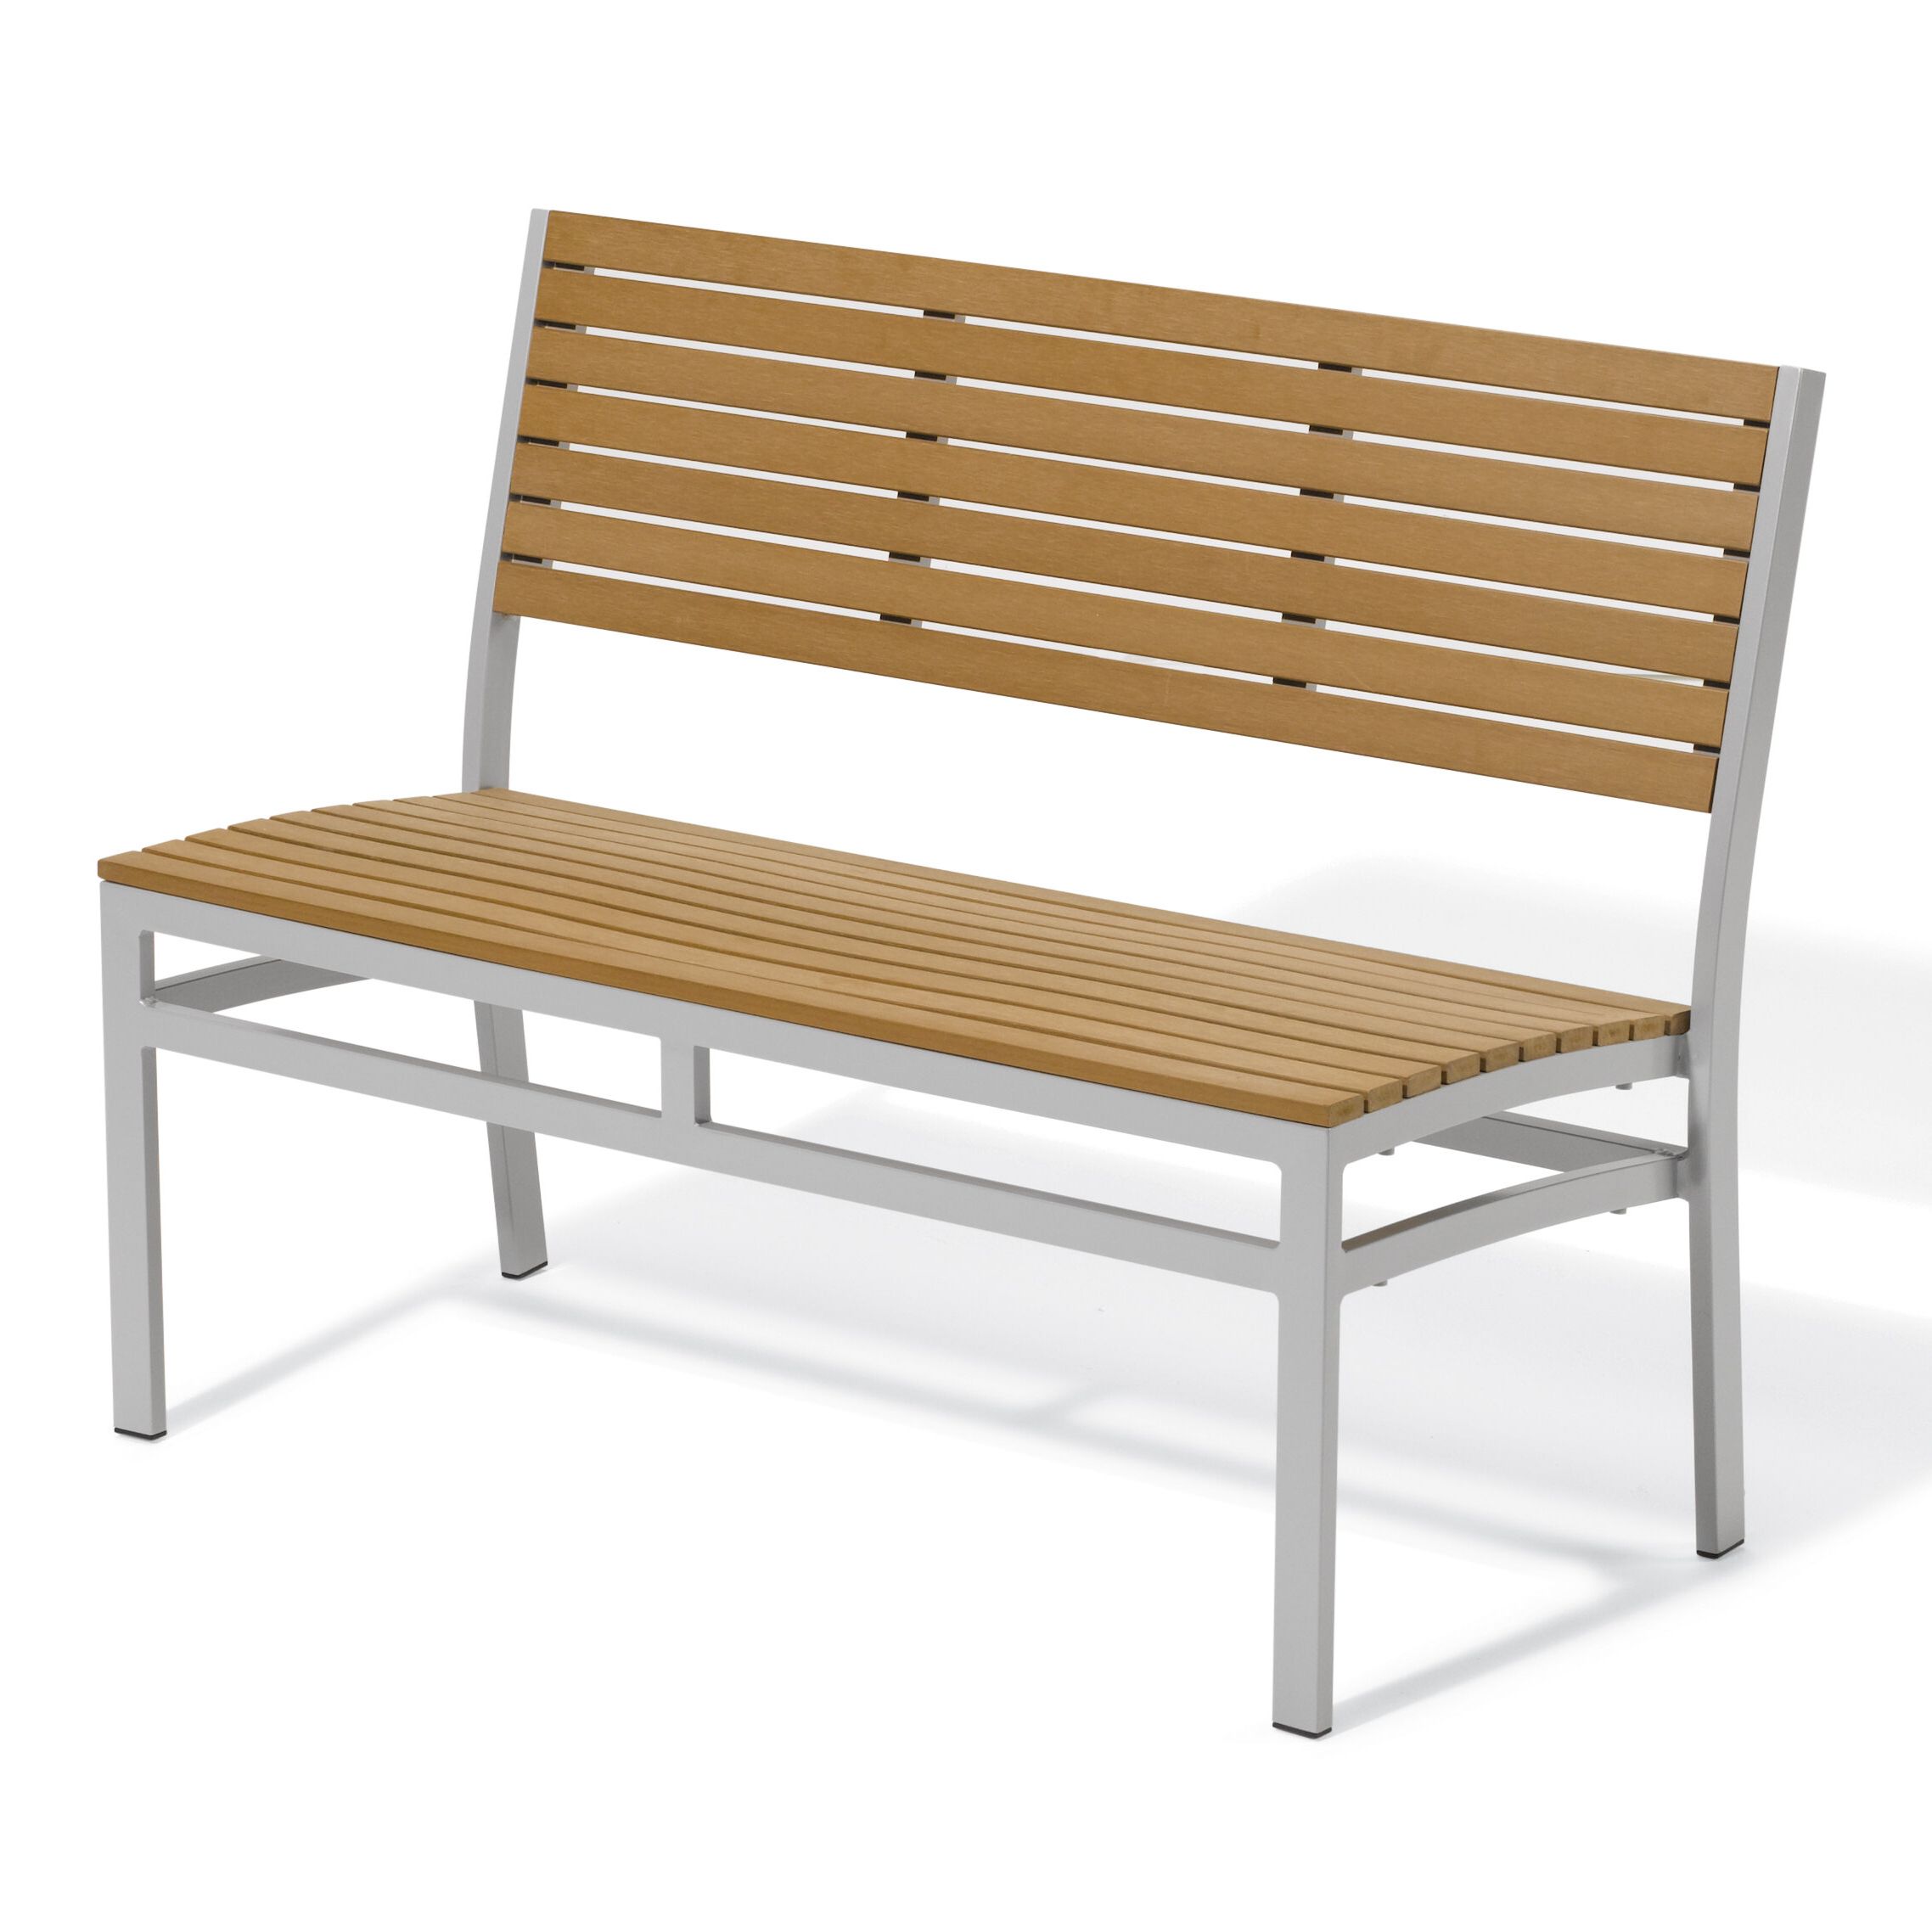 Denson Aluminum Garden Bench Regarding Most Up To Date Alvah Slatted Cast Iron And Tubular Steel Garden Benches (View 18 of 30)